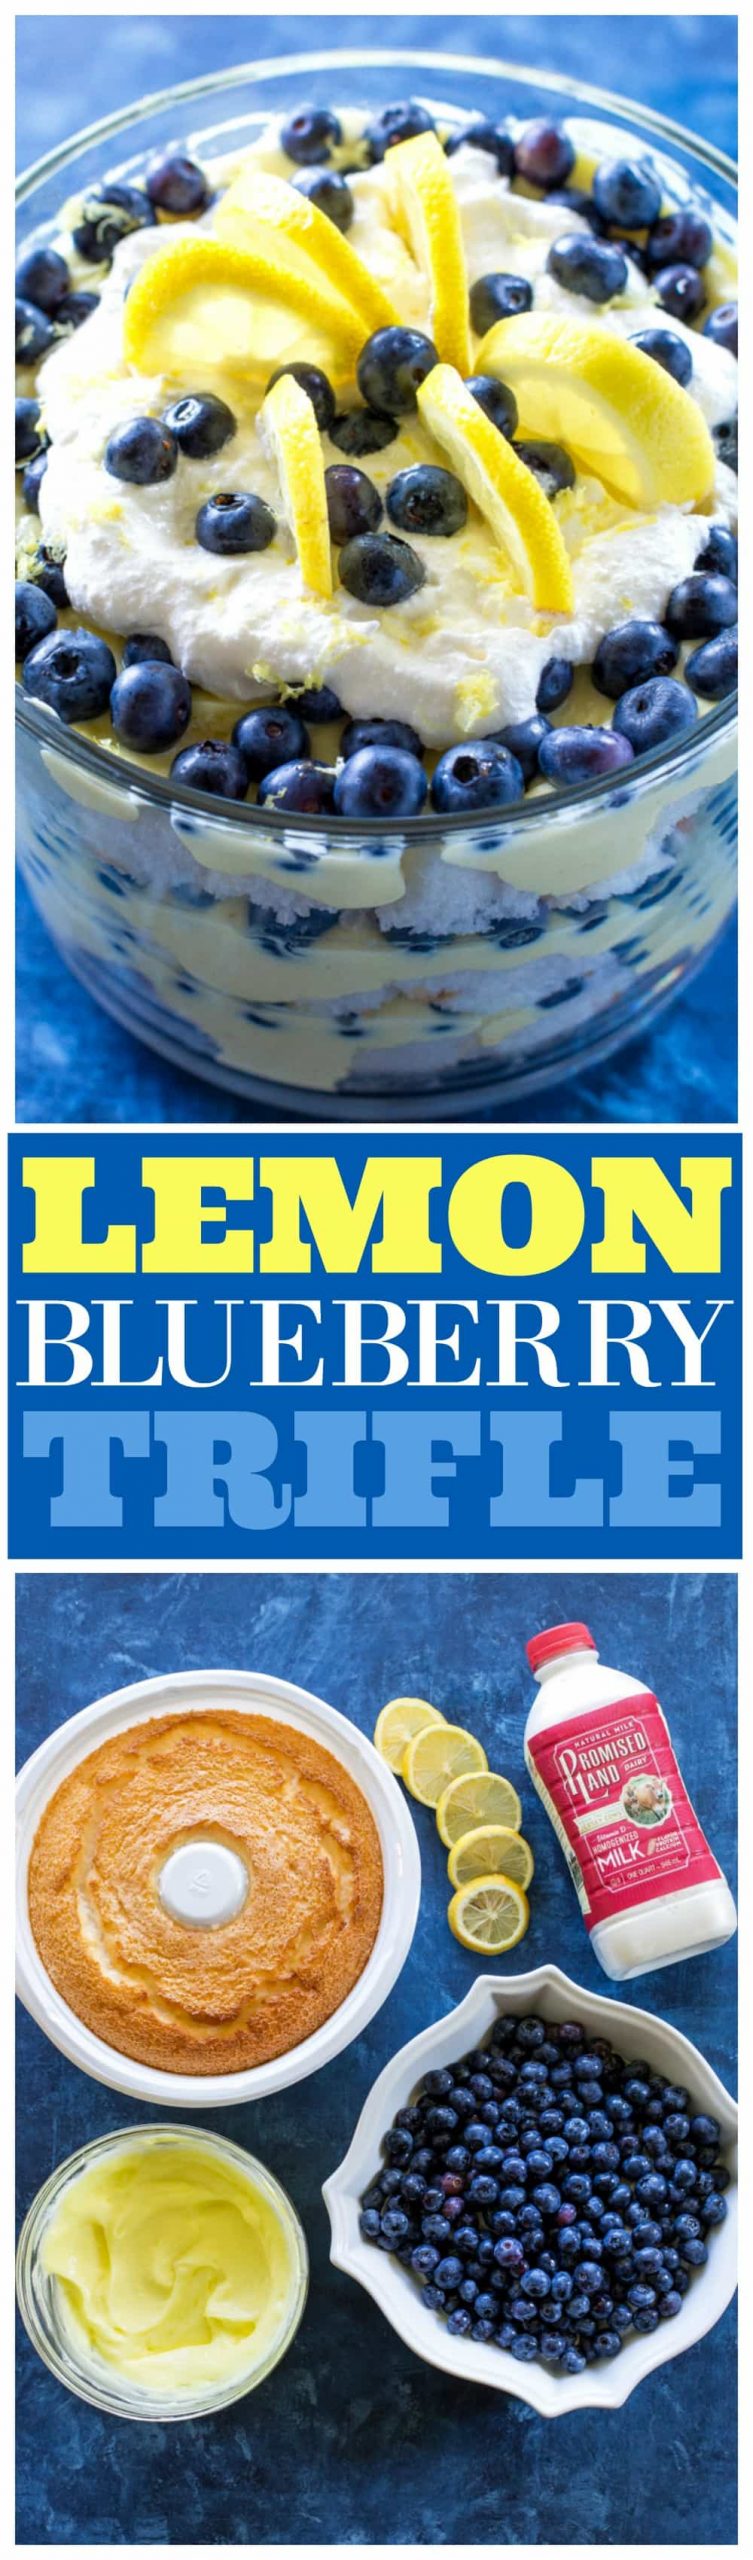 This Lemon Blueberry Trifle is layers of angel food cake, lemon pudding, and blueberries. A crowd pleasing dessert! #blueberry #lemon #trifle #dessert #recipe